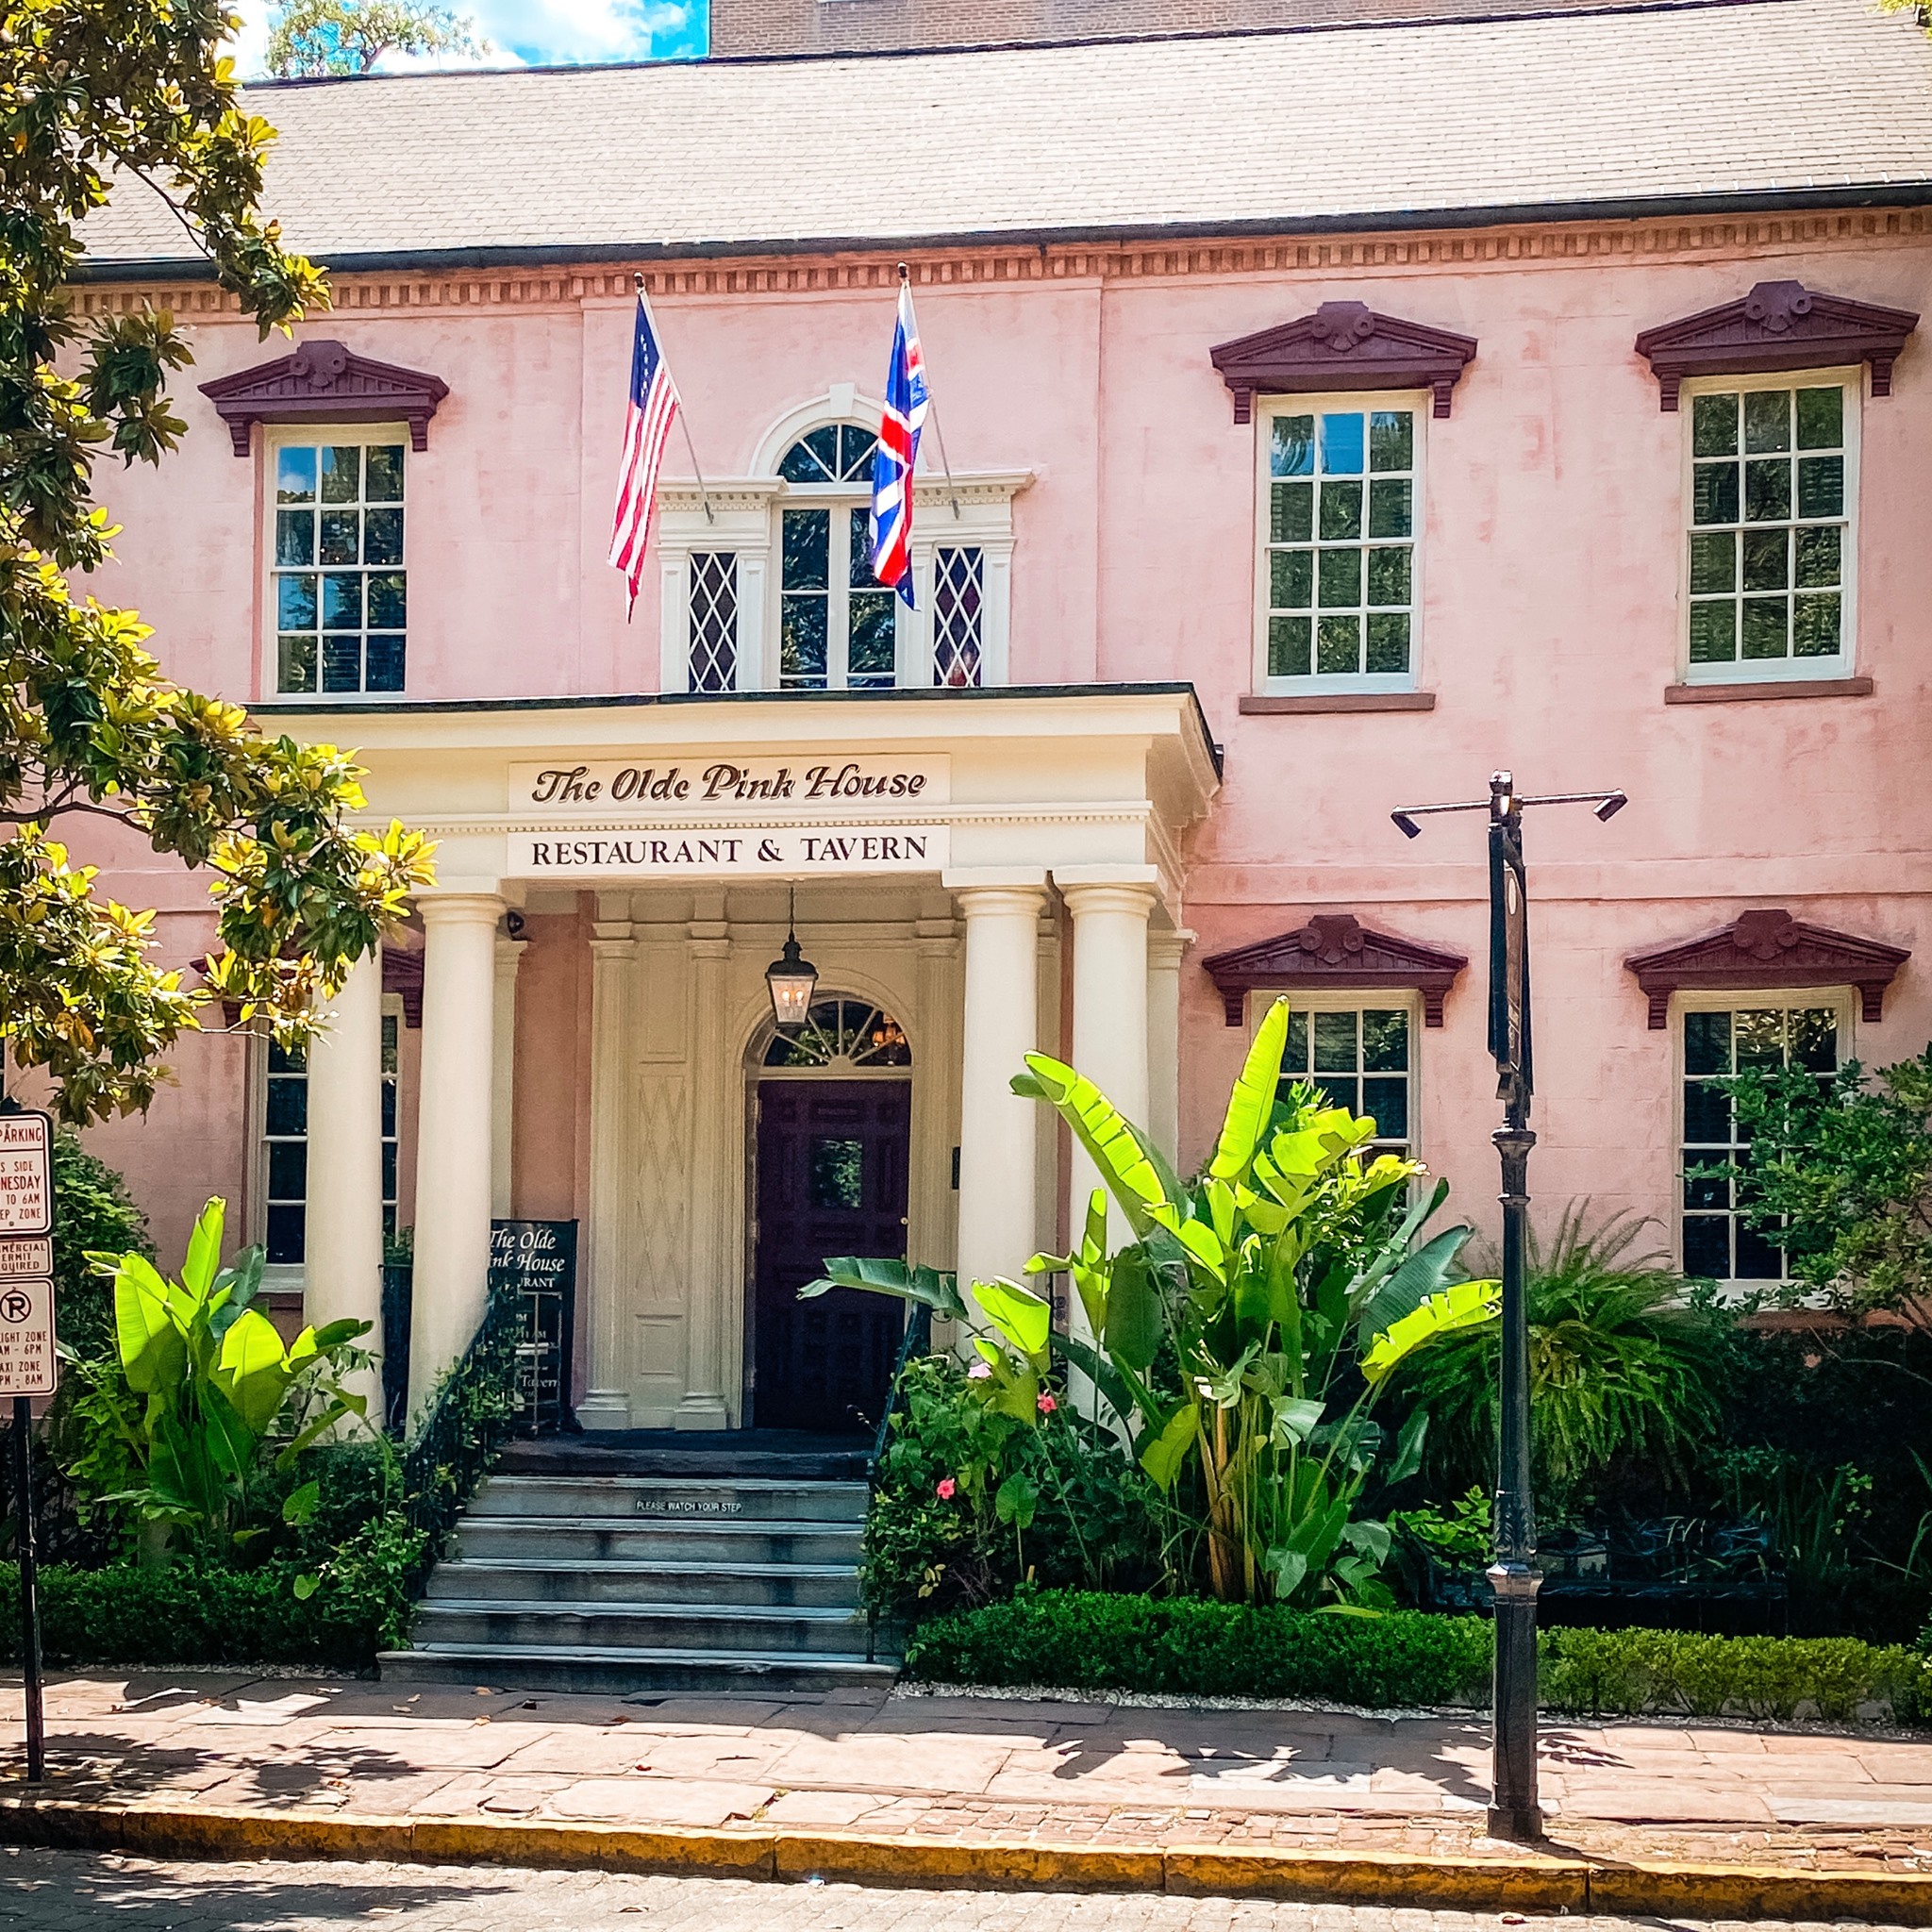 One of Savannah’s Oldest – The Olde Pink House